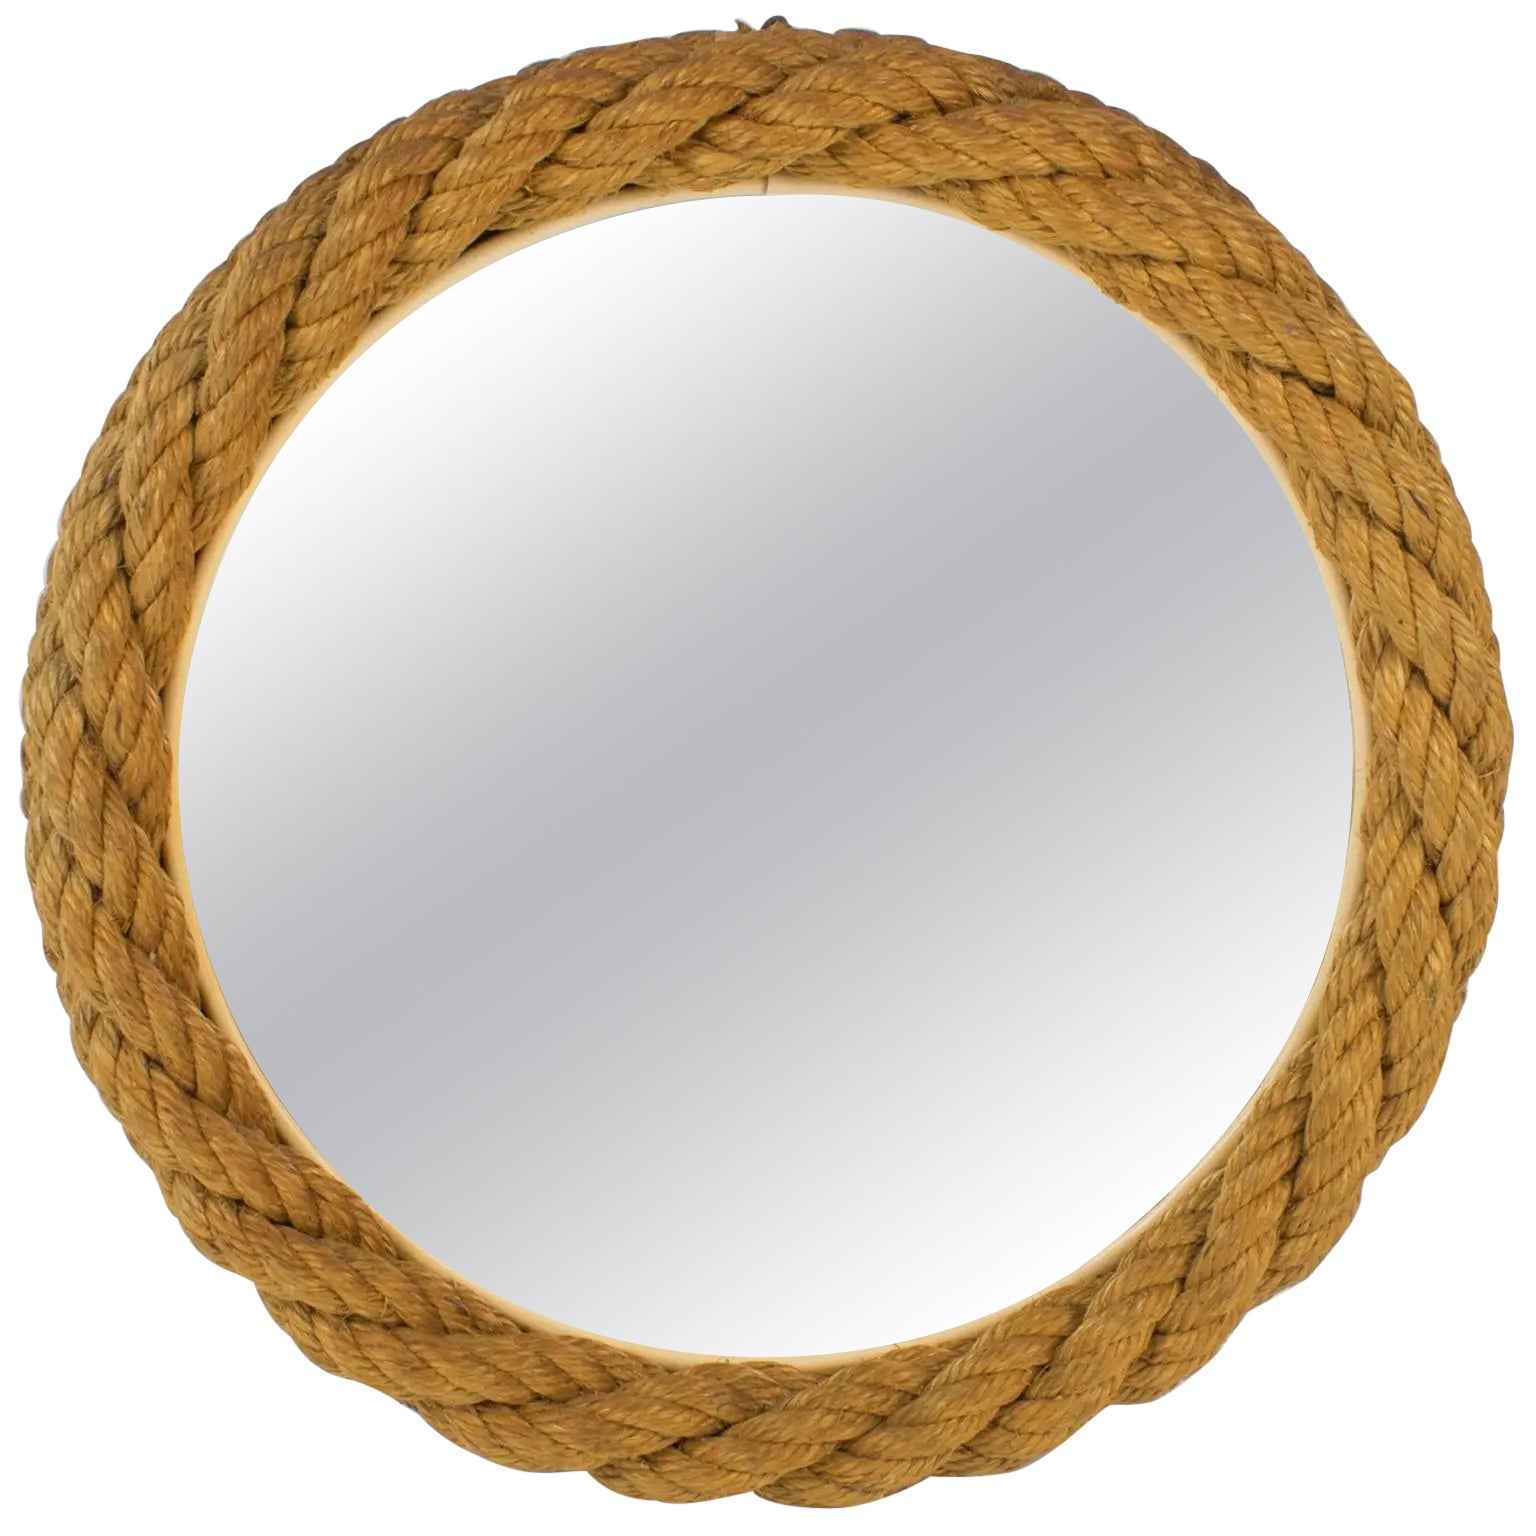 Audoux Minet France, Wall-Mounted Rope Mirror, 1960s For Sale